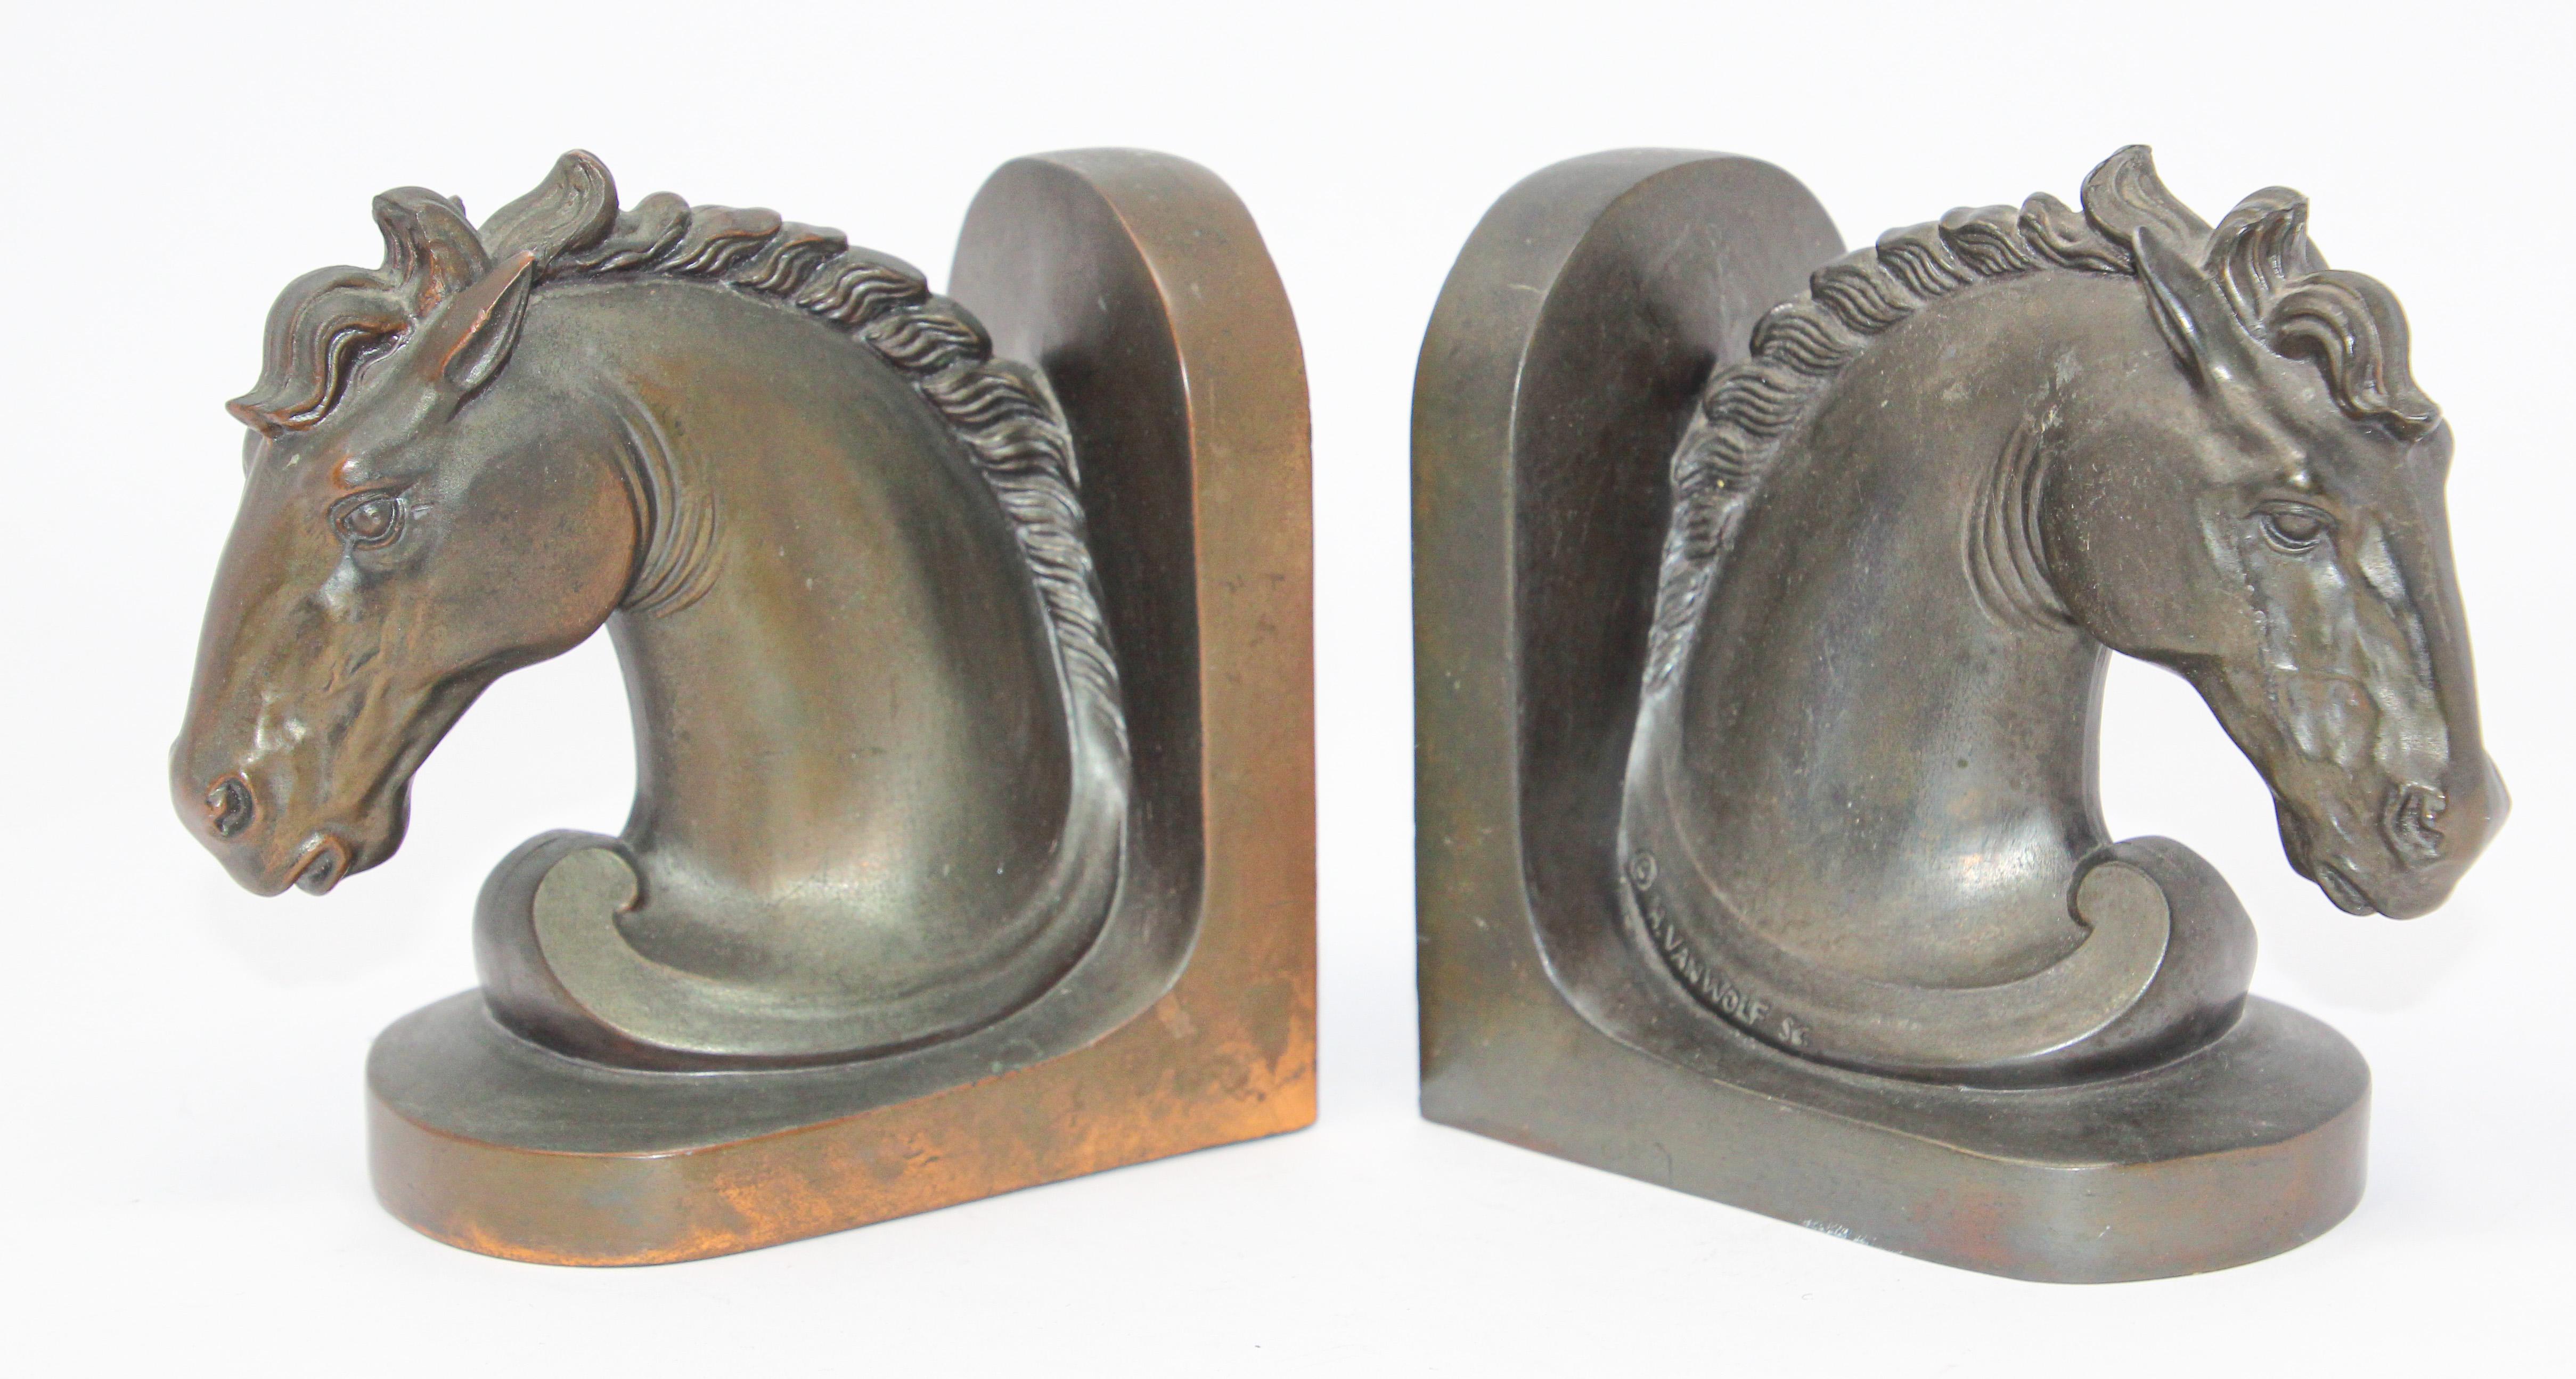 20th Century Art Deco Stylized Cast Bronze Sculptures of Horse Bust on Stand Bookends